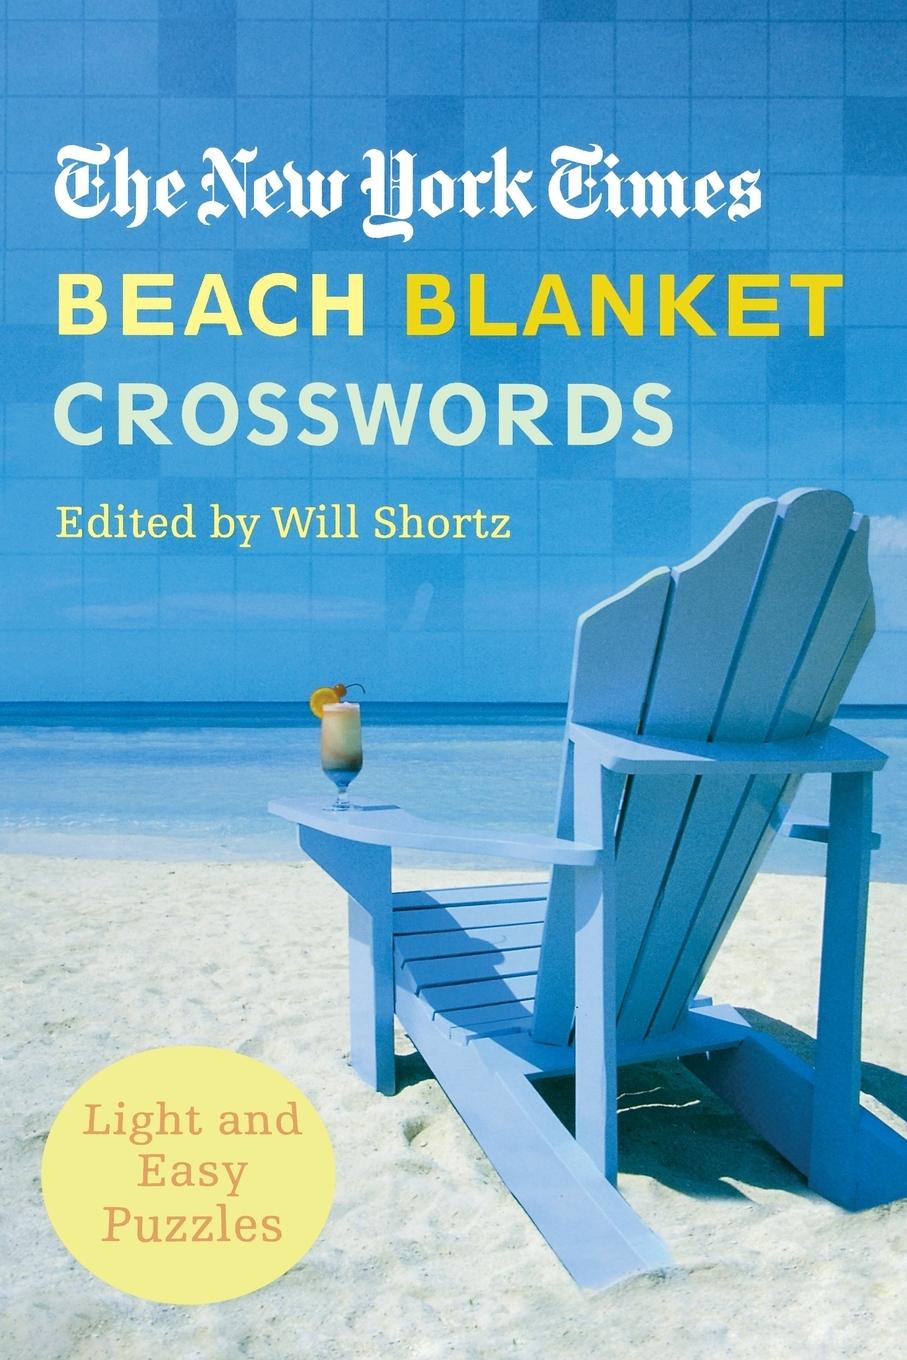 The New York Times Beach Blanket Crosswords: Light and Easy Puzzles - New York Times